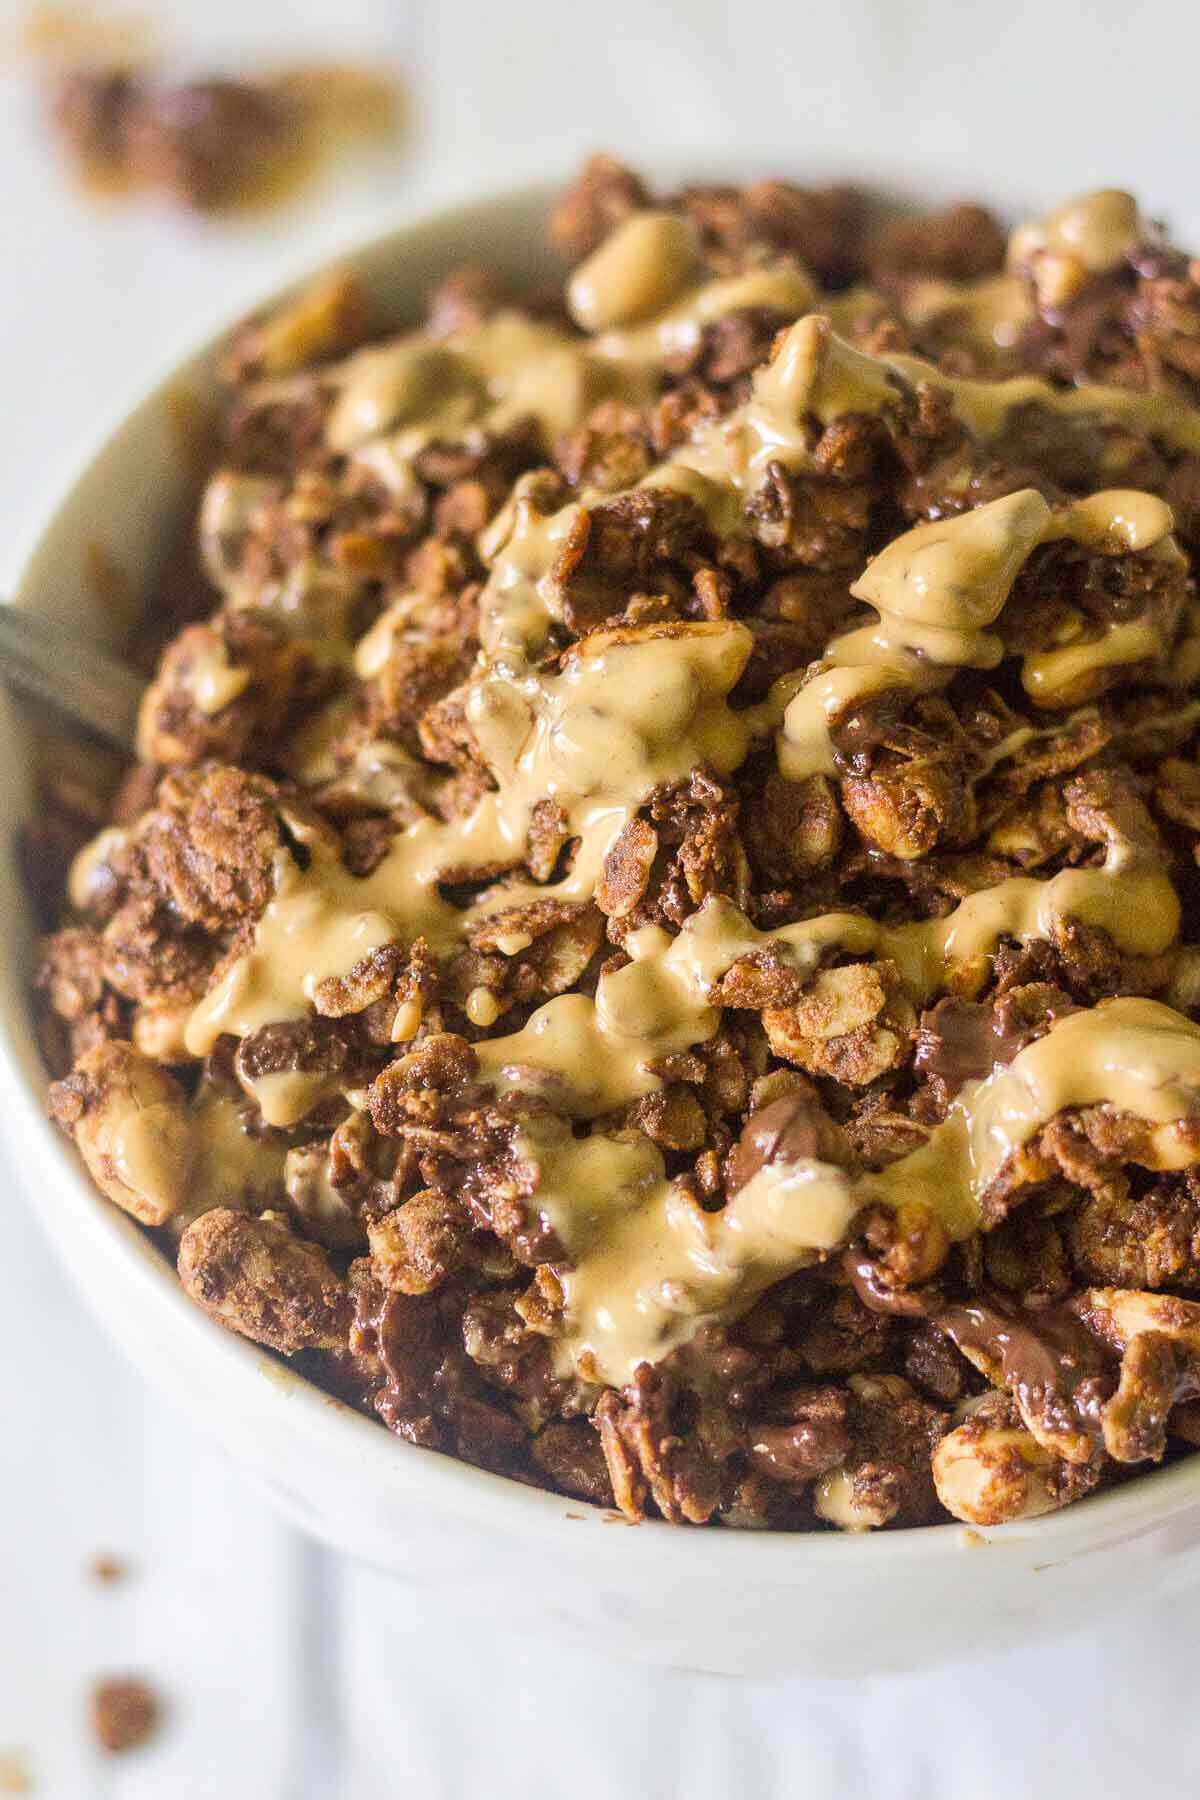 This Chocolate Peanut Butter Protein Granola is crunchy, flavorful and packed with healthy ingredients. It's a delicious way to start the day! The perfect breakfast recipe or snack recipe, this easy granola comes together in minutes and tastes so good.